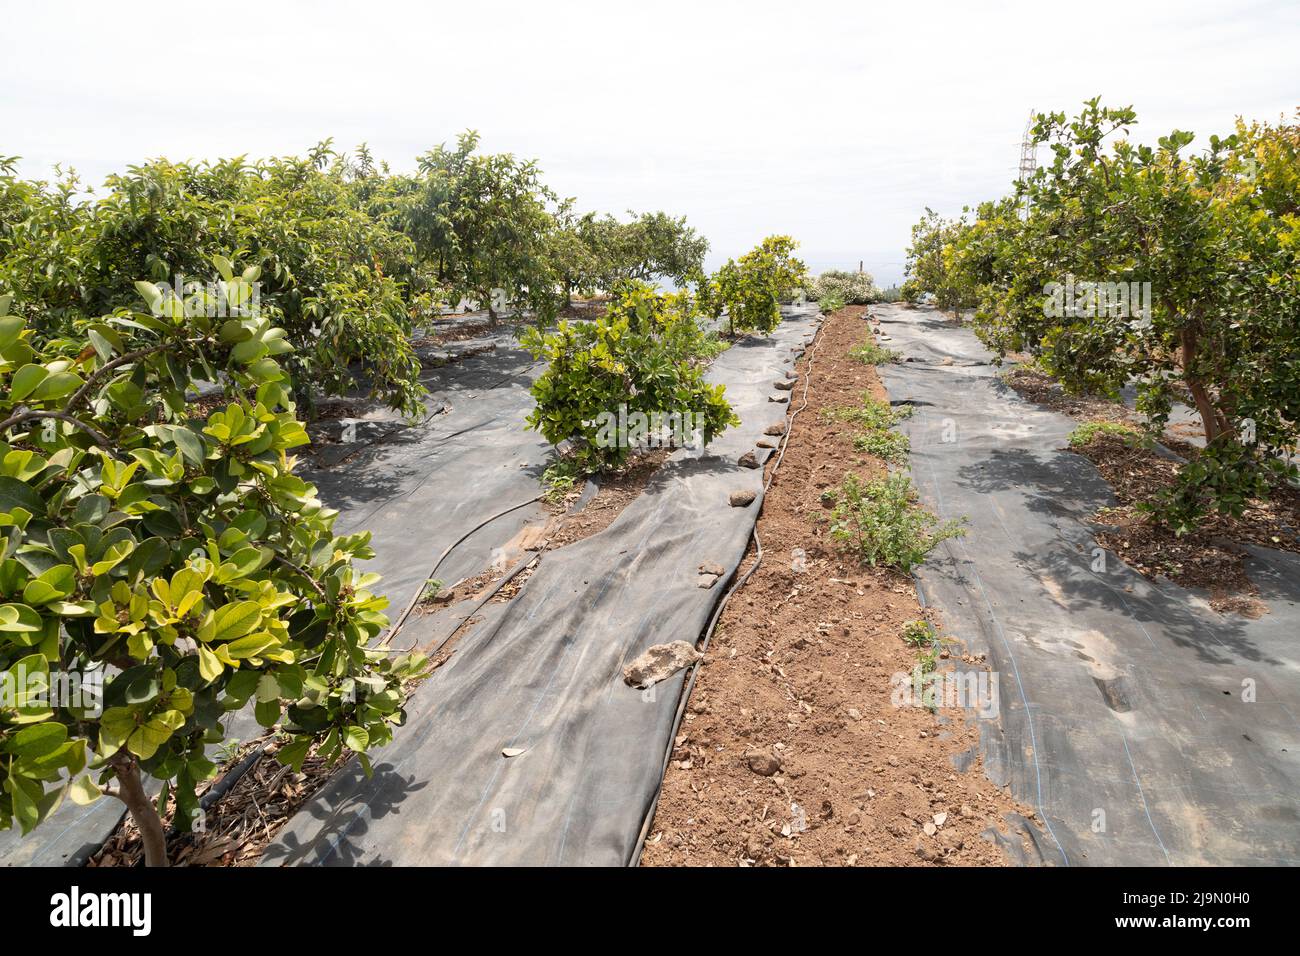 Fruit bushes at the Finca Ecológica La Calabacera in Tenerife, Spain. The finca employs organic production techniques. Stock Photo